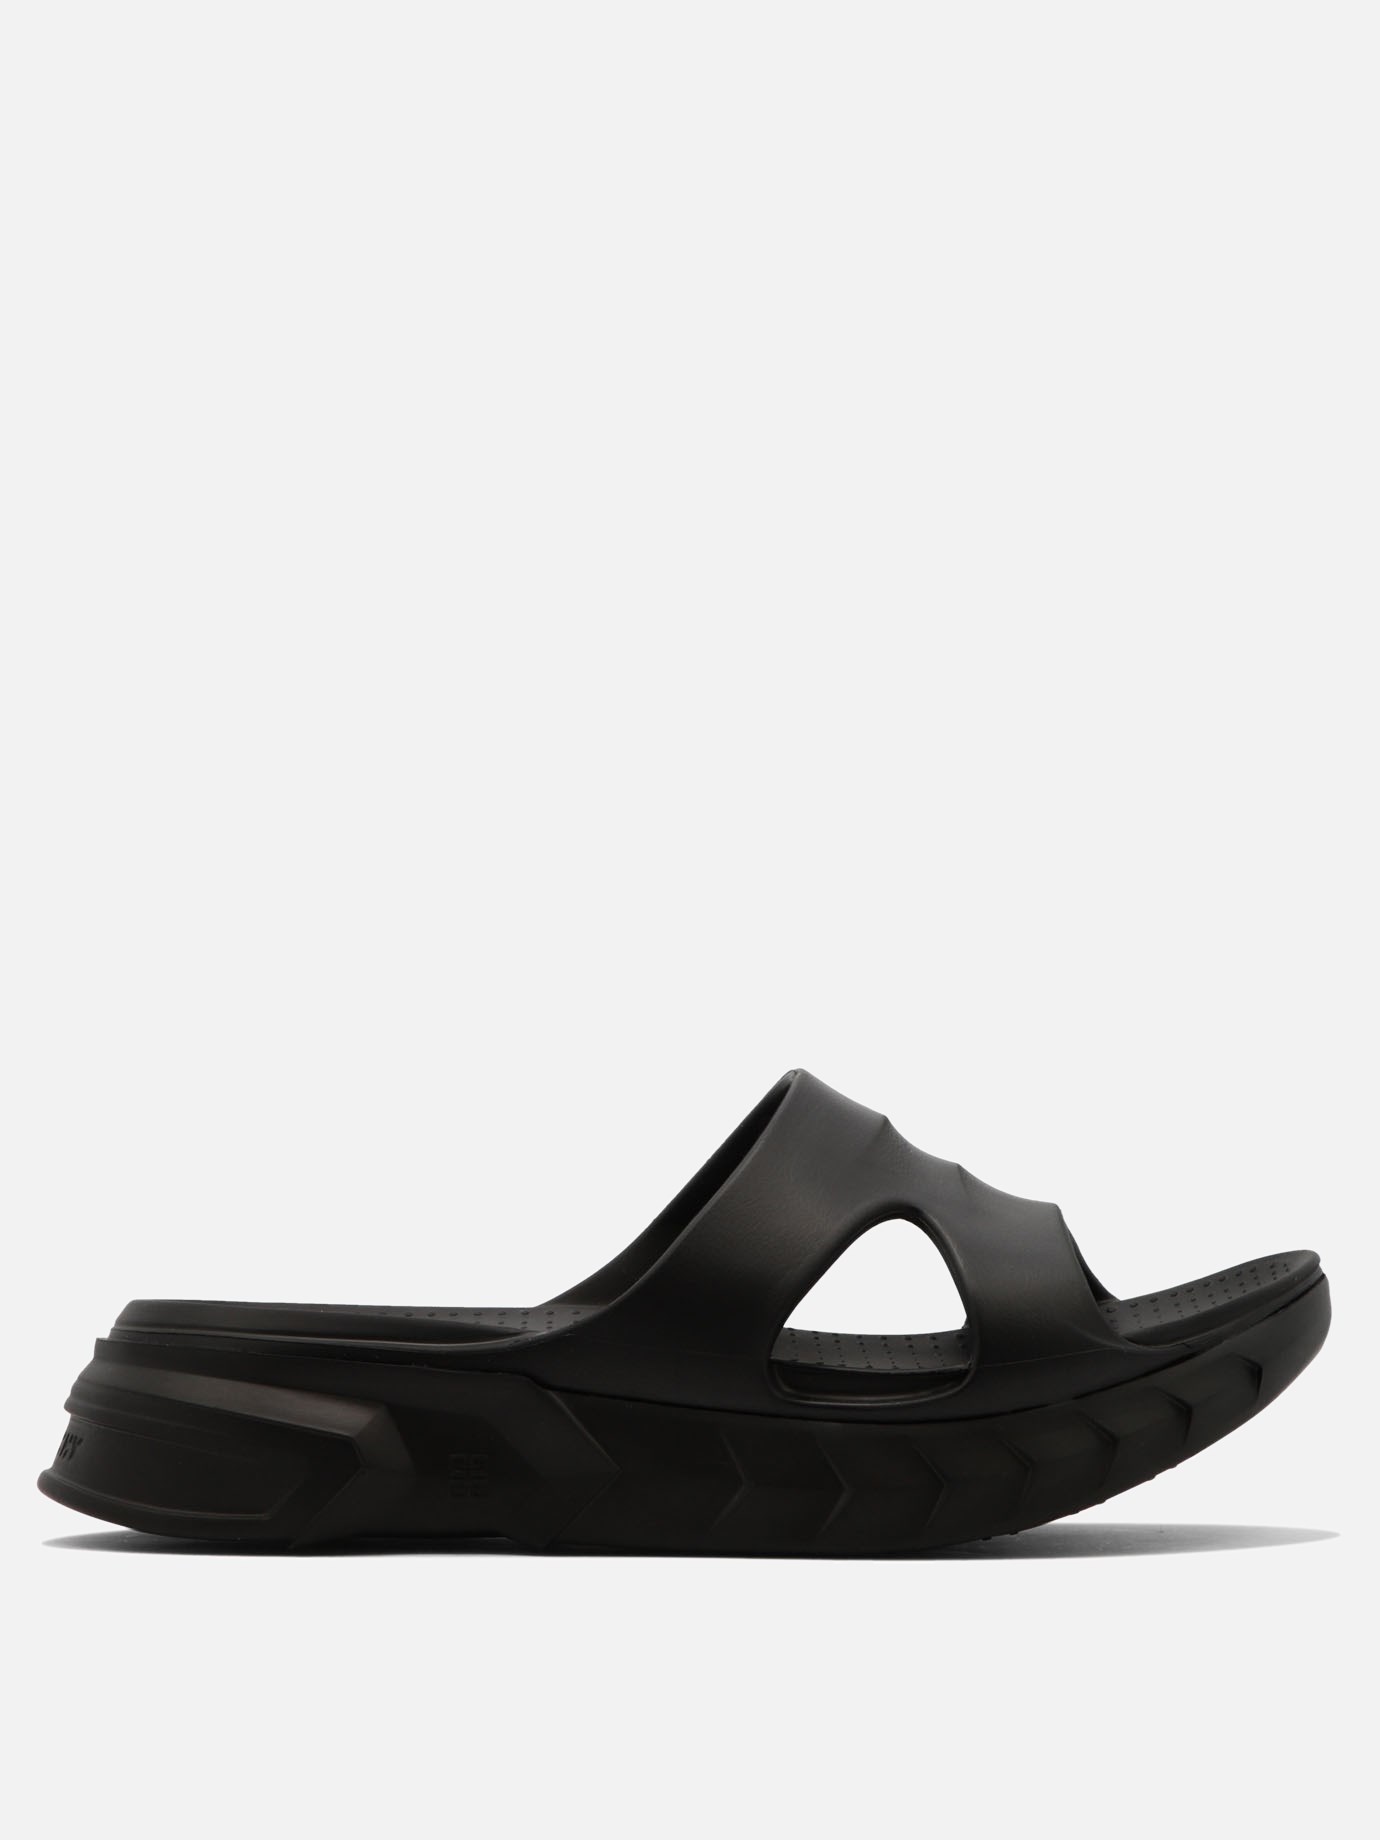  Marshmallow  sandals by Givenchy